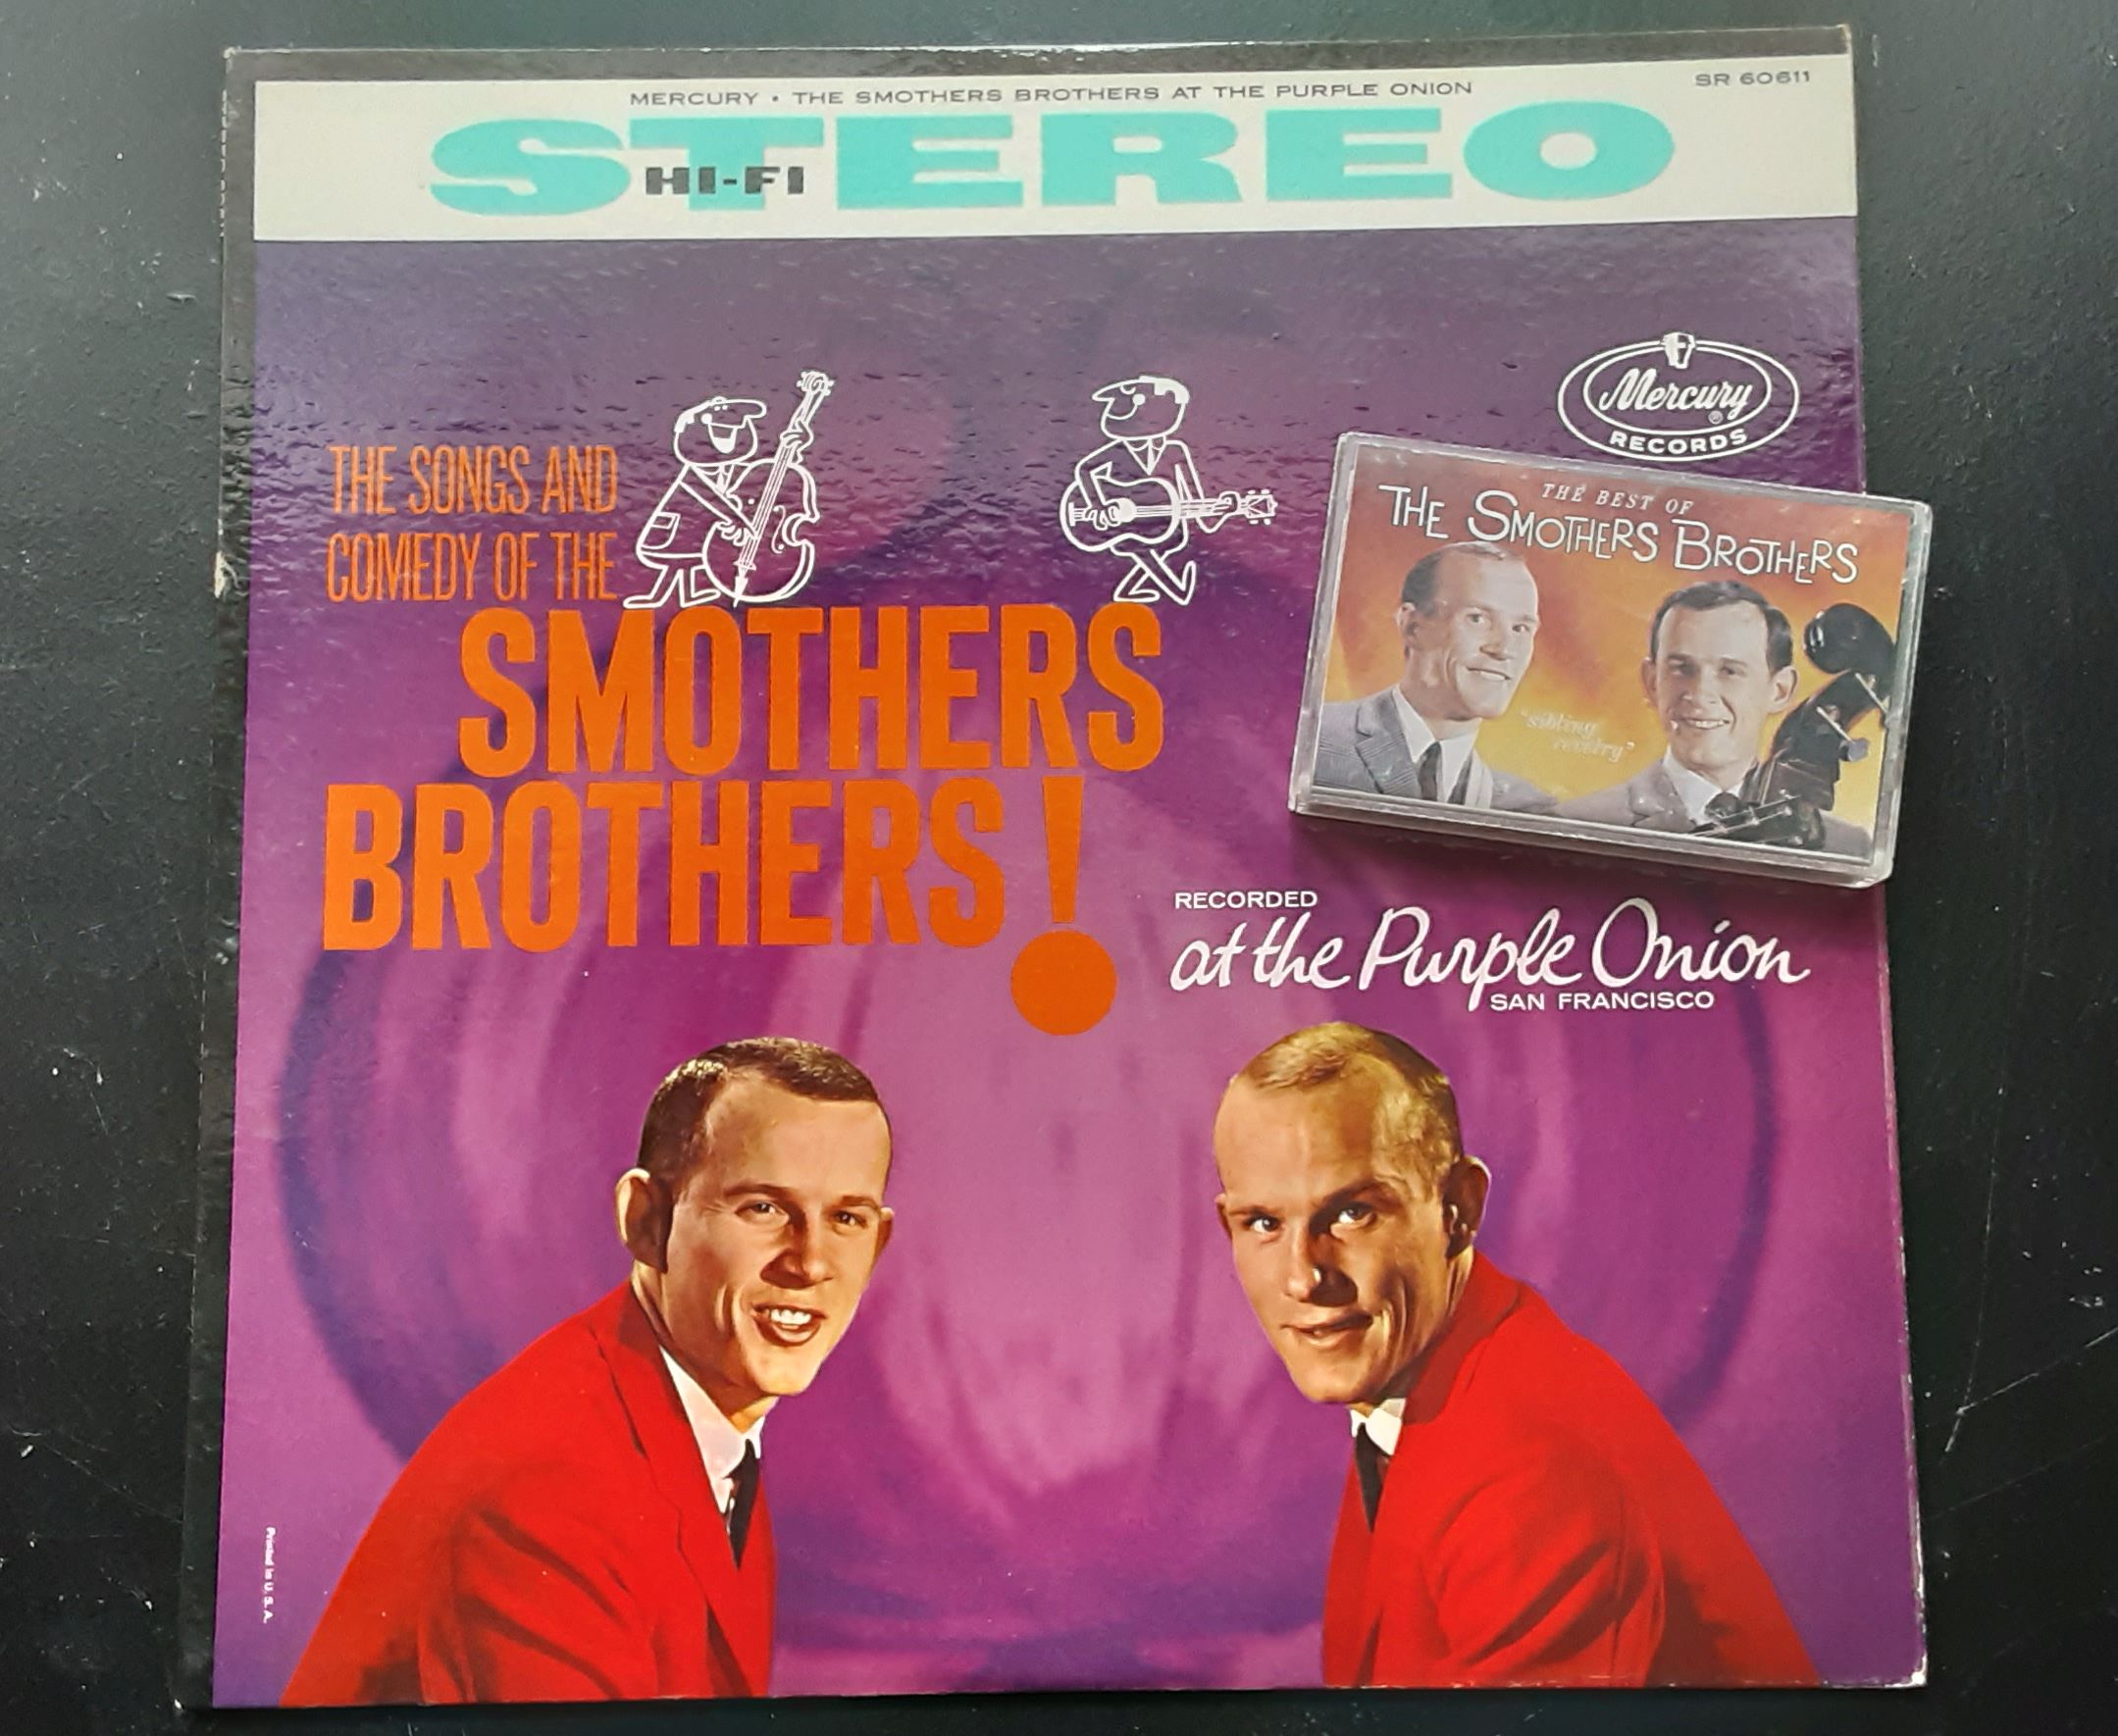 My two favorite Smothers Brothers albums - Best of and Purple Onion